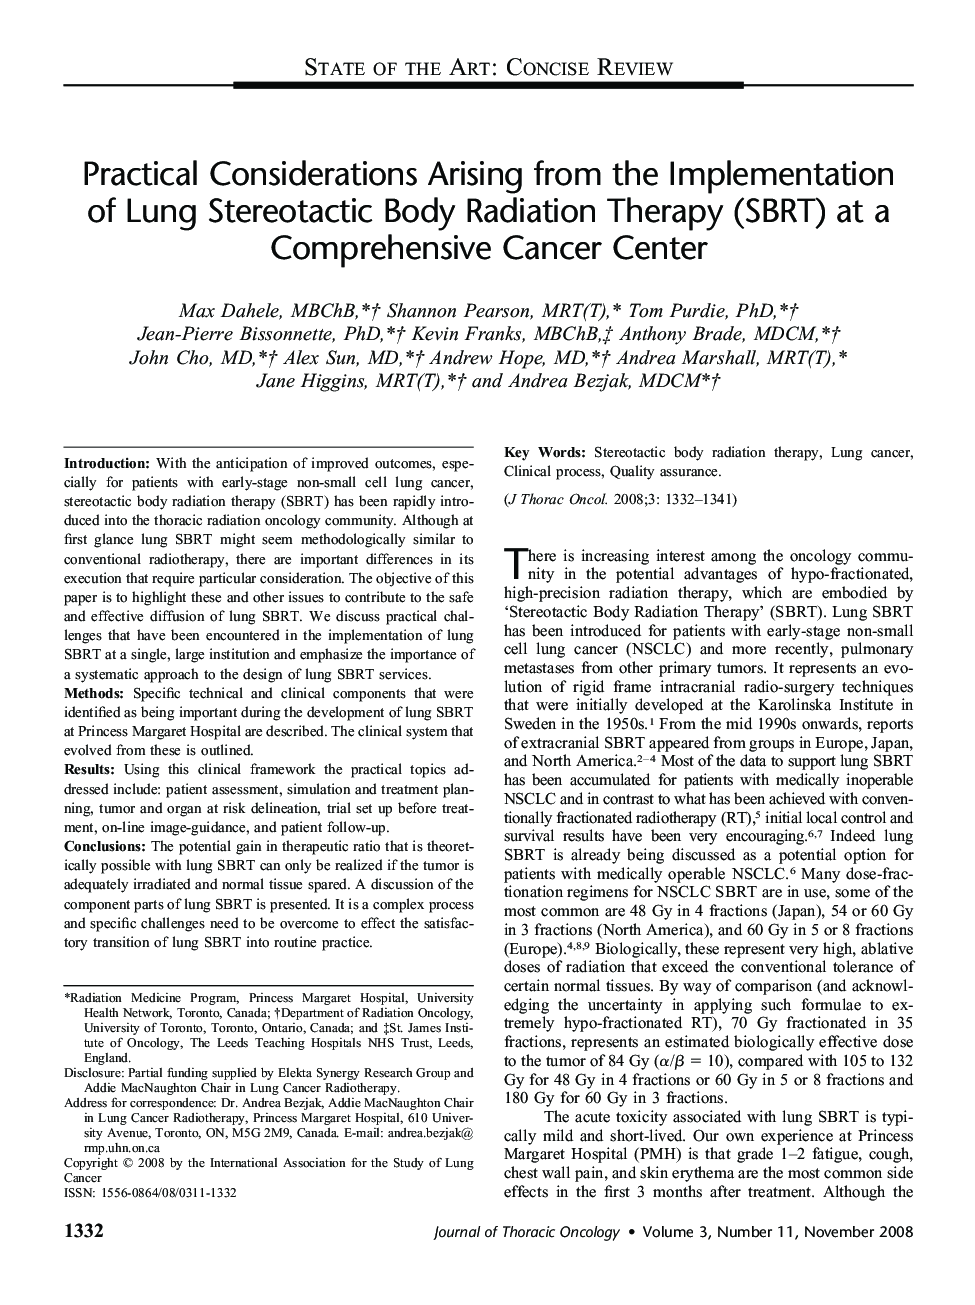 Practical Considerations Arising from the Implementation of Lung Stereotactic Body Radiation Therapy (SBRT) at a Comprehensive Cancer Center 